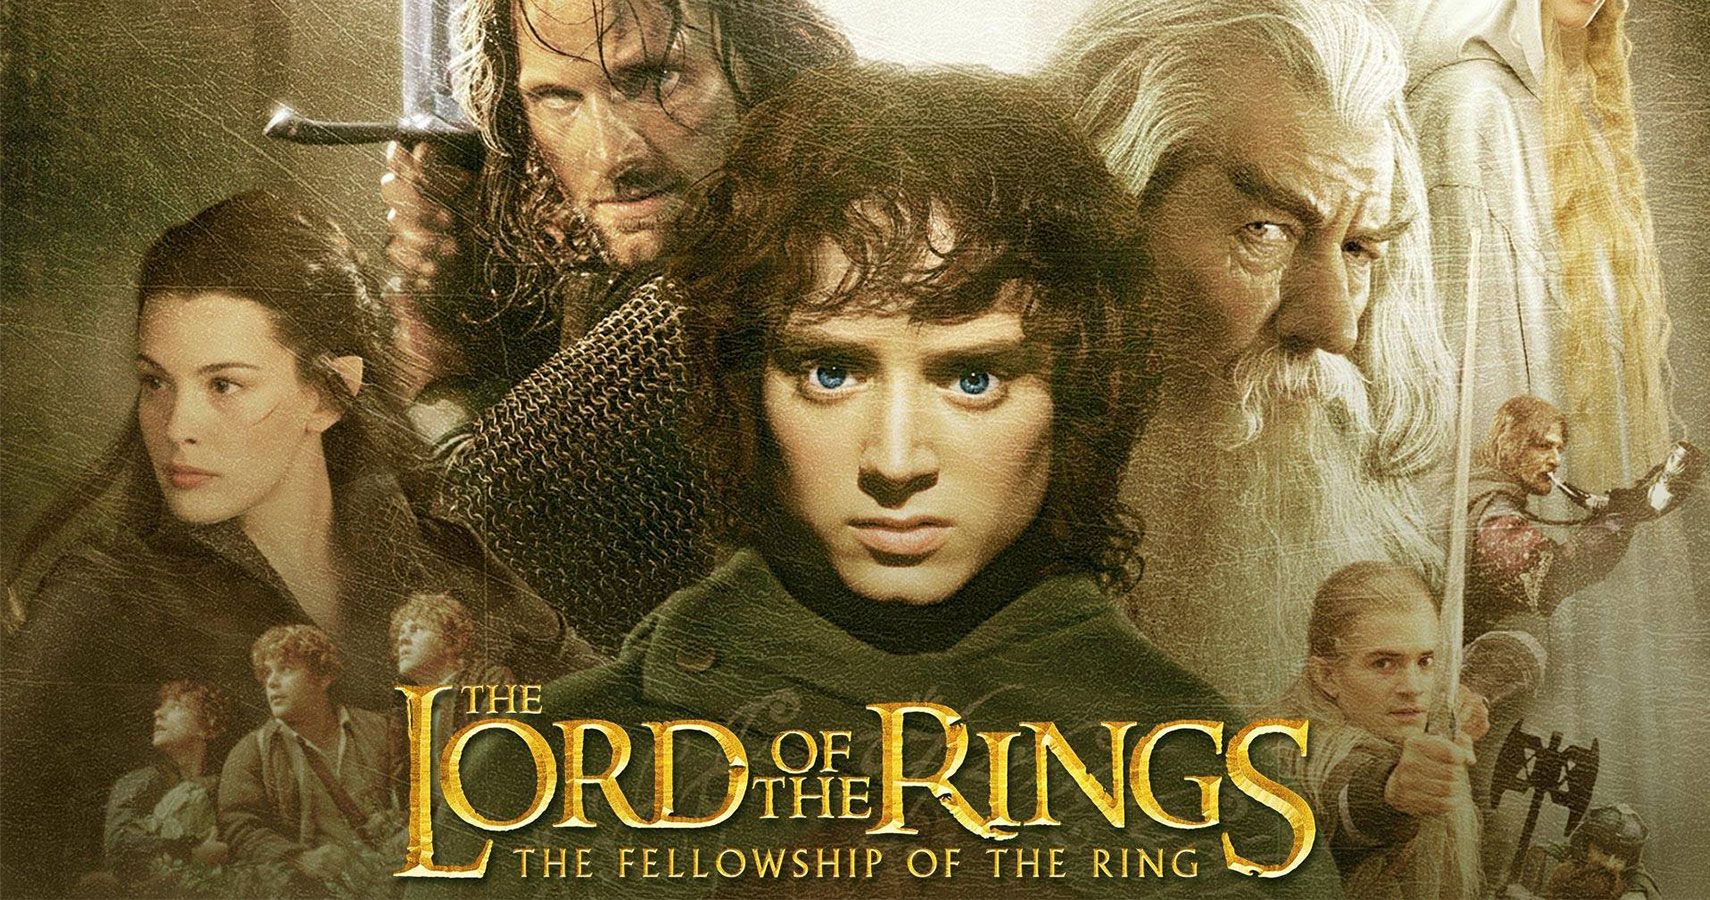 The Lord of the Rings: The Return of download the new version